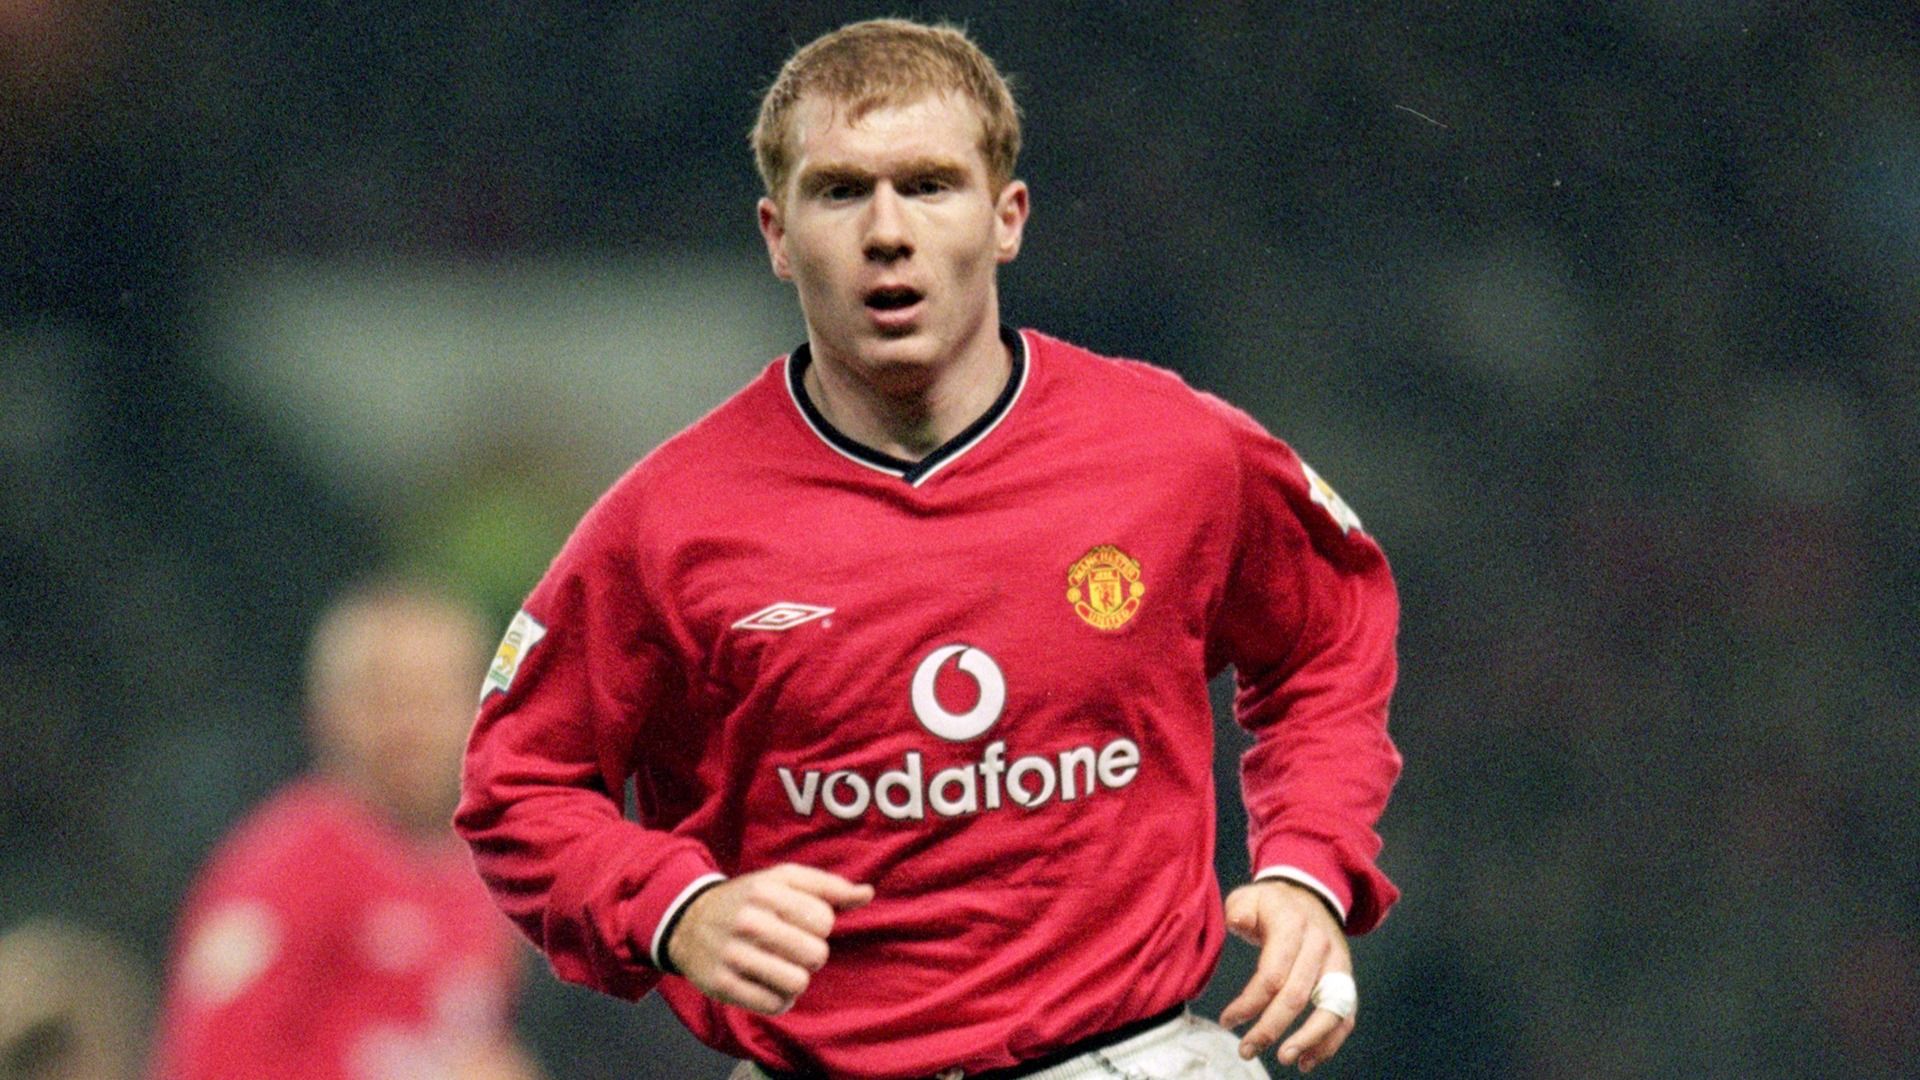 Scholes Criticizes MU For Wearing Hooded Jackets During Training Sessions